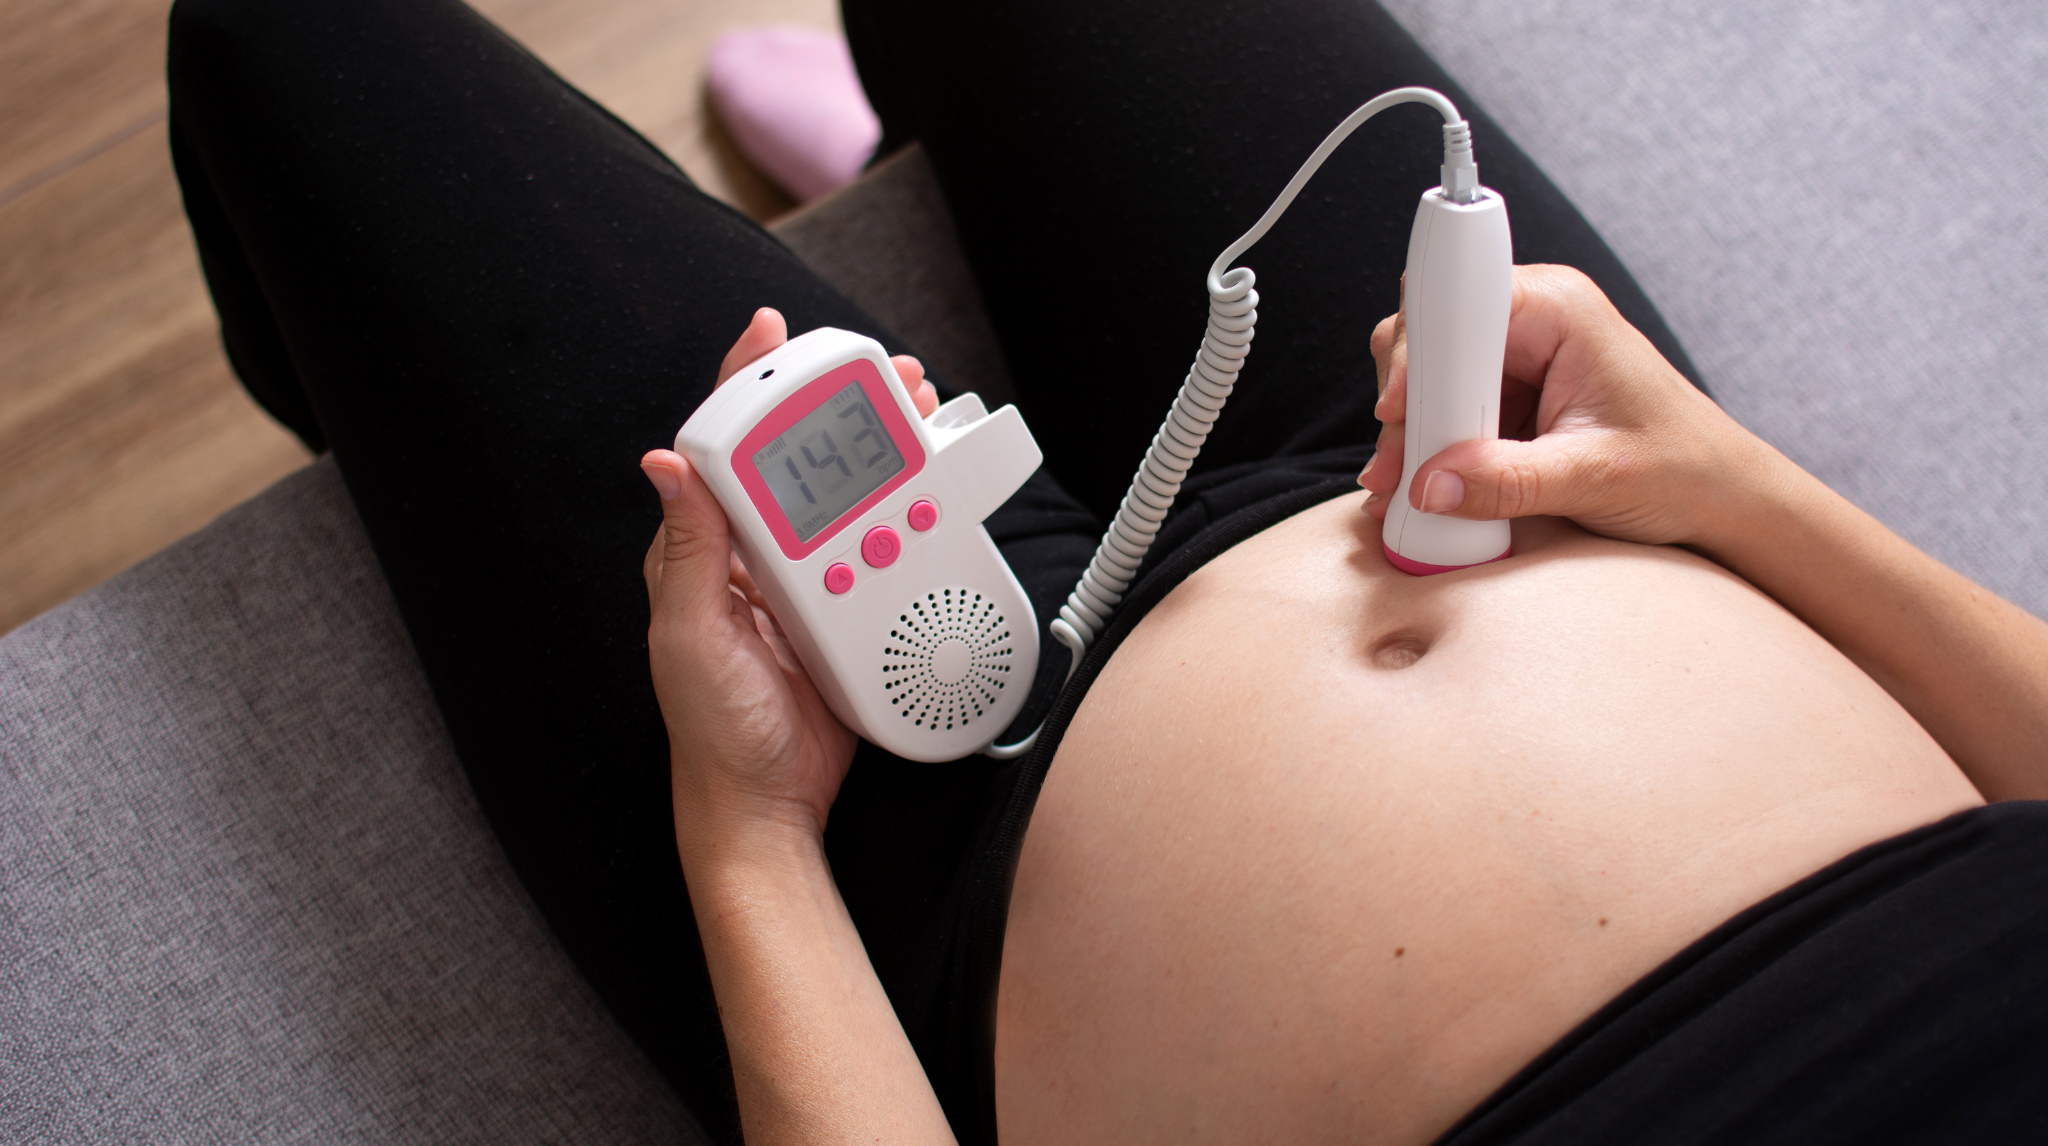 Is my Baby Growing Properly? - Baby Doppler Blog